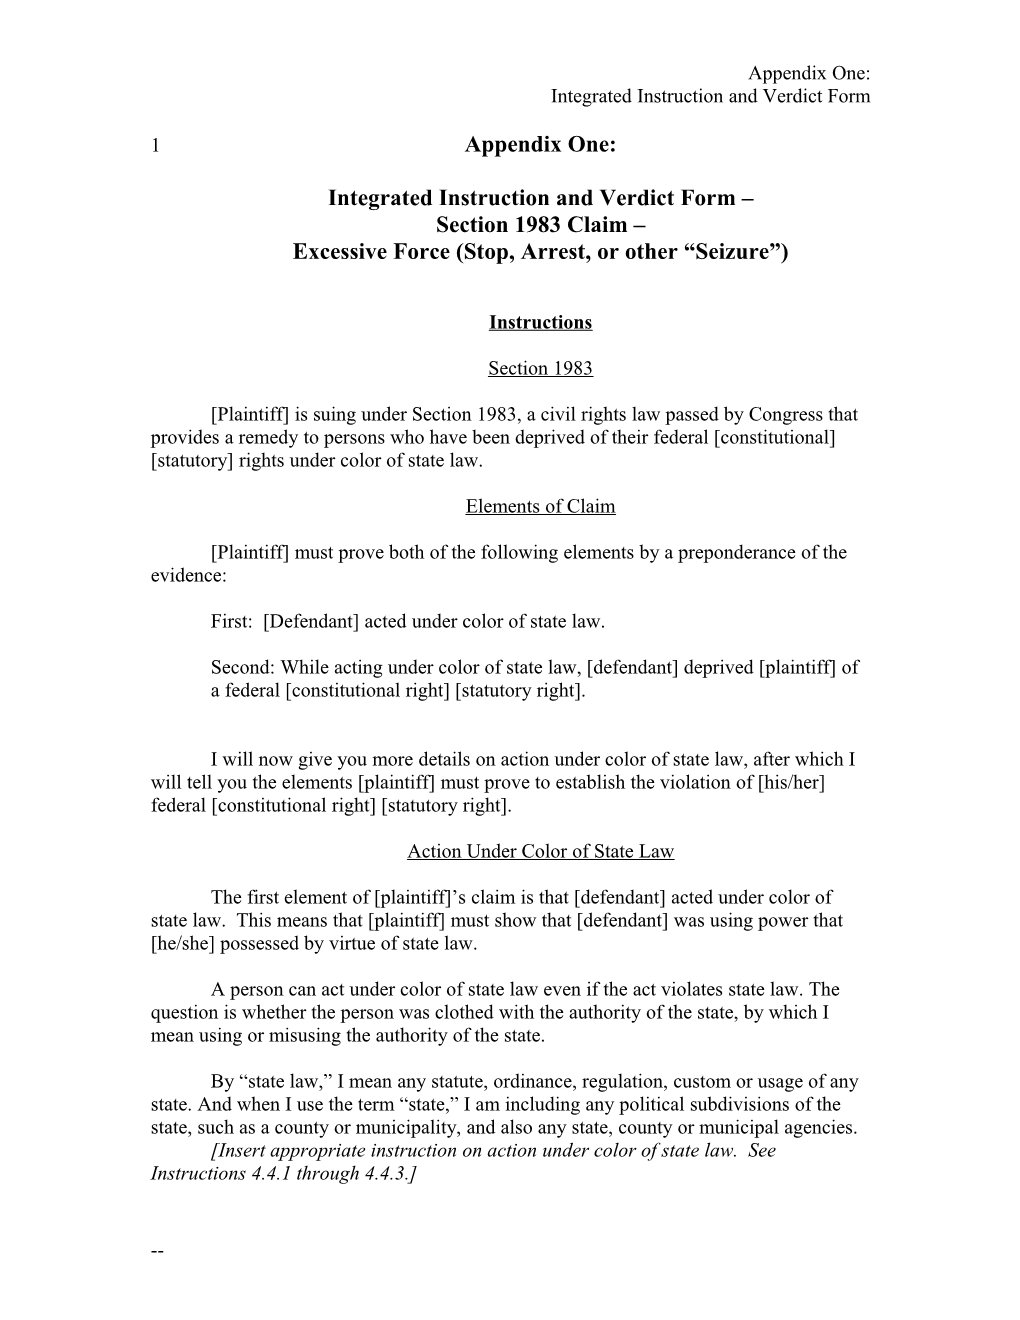 Integrated Instruction and Verdict Form